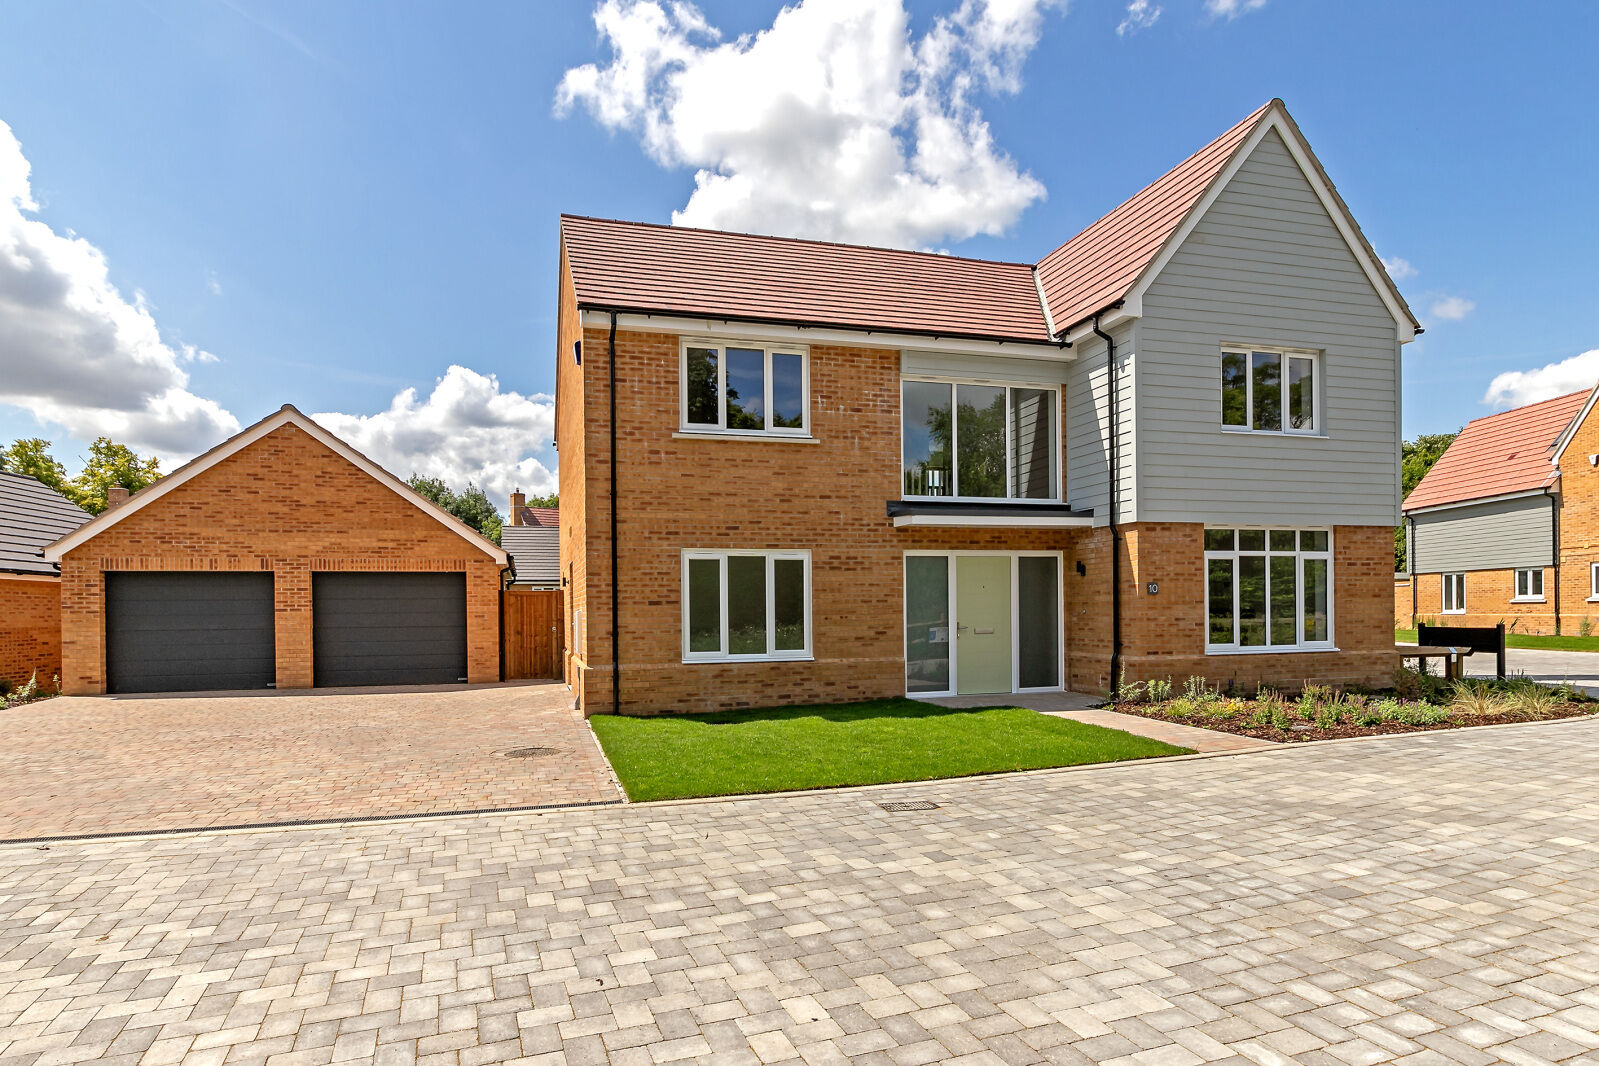 4 bedroom detached house for sale Meadow Croft, Royston, SG8, main image